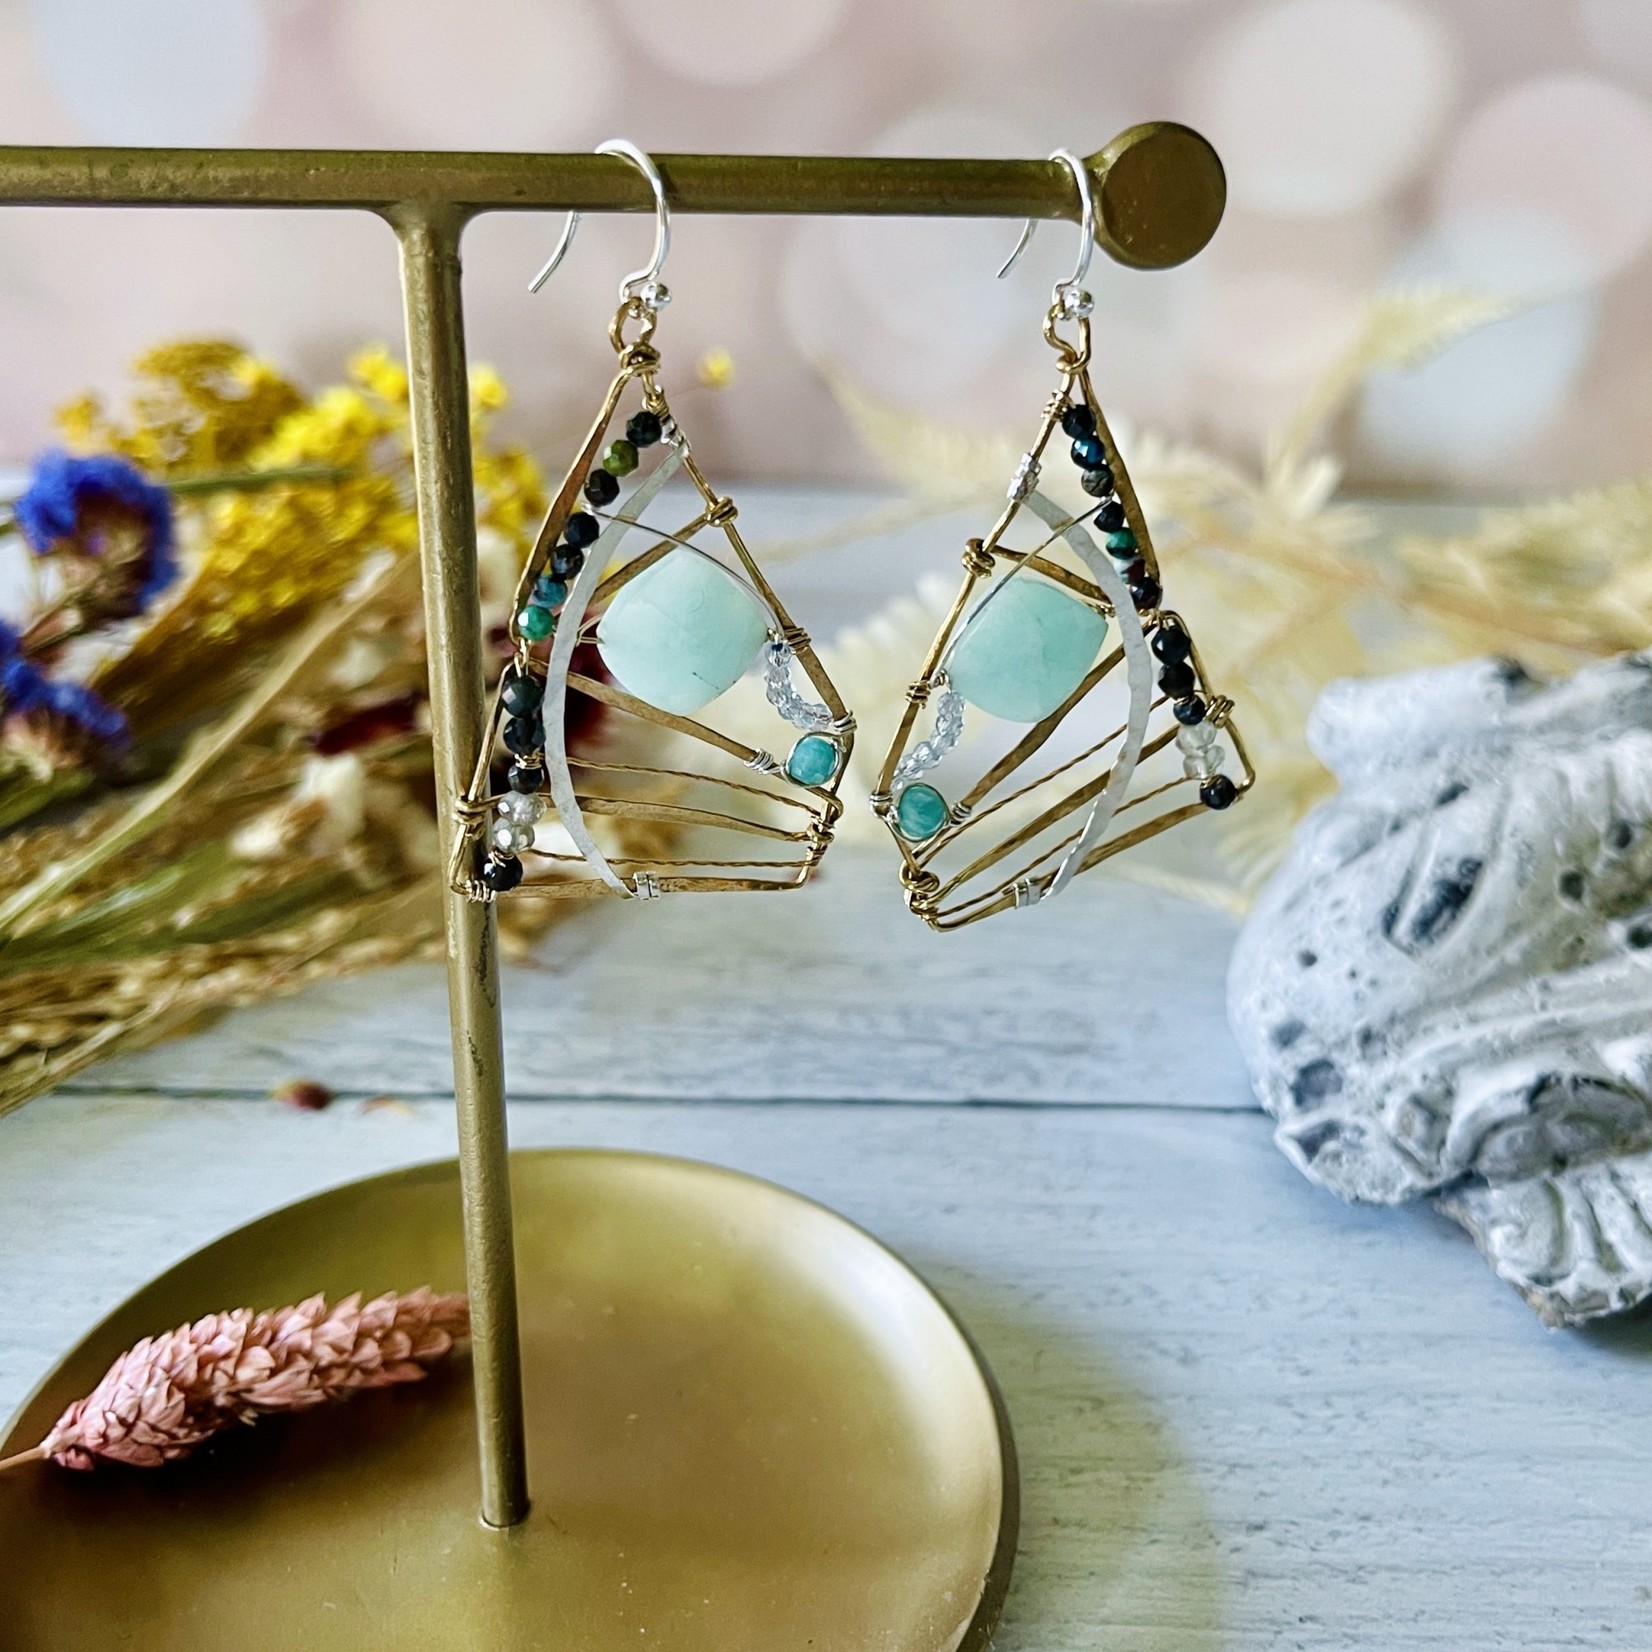 Handmade Butterfly Wing Earrings by Art by Any Means